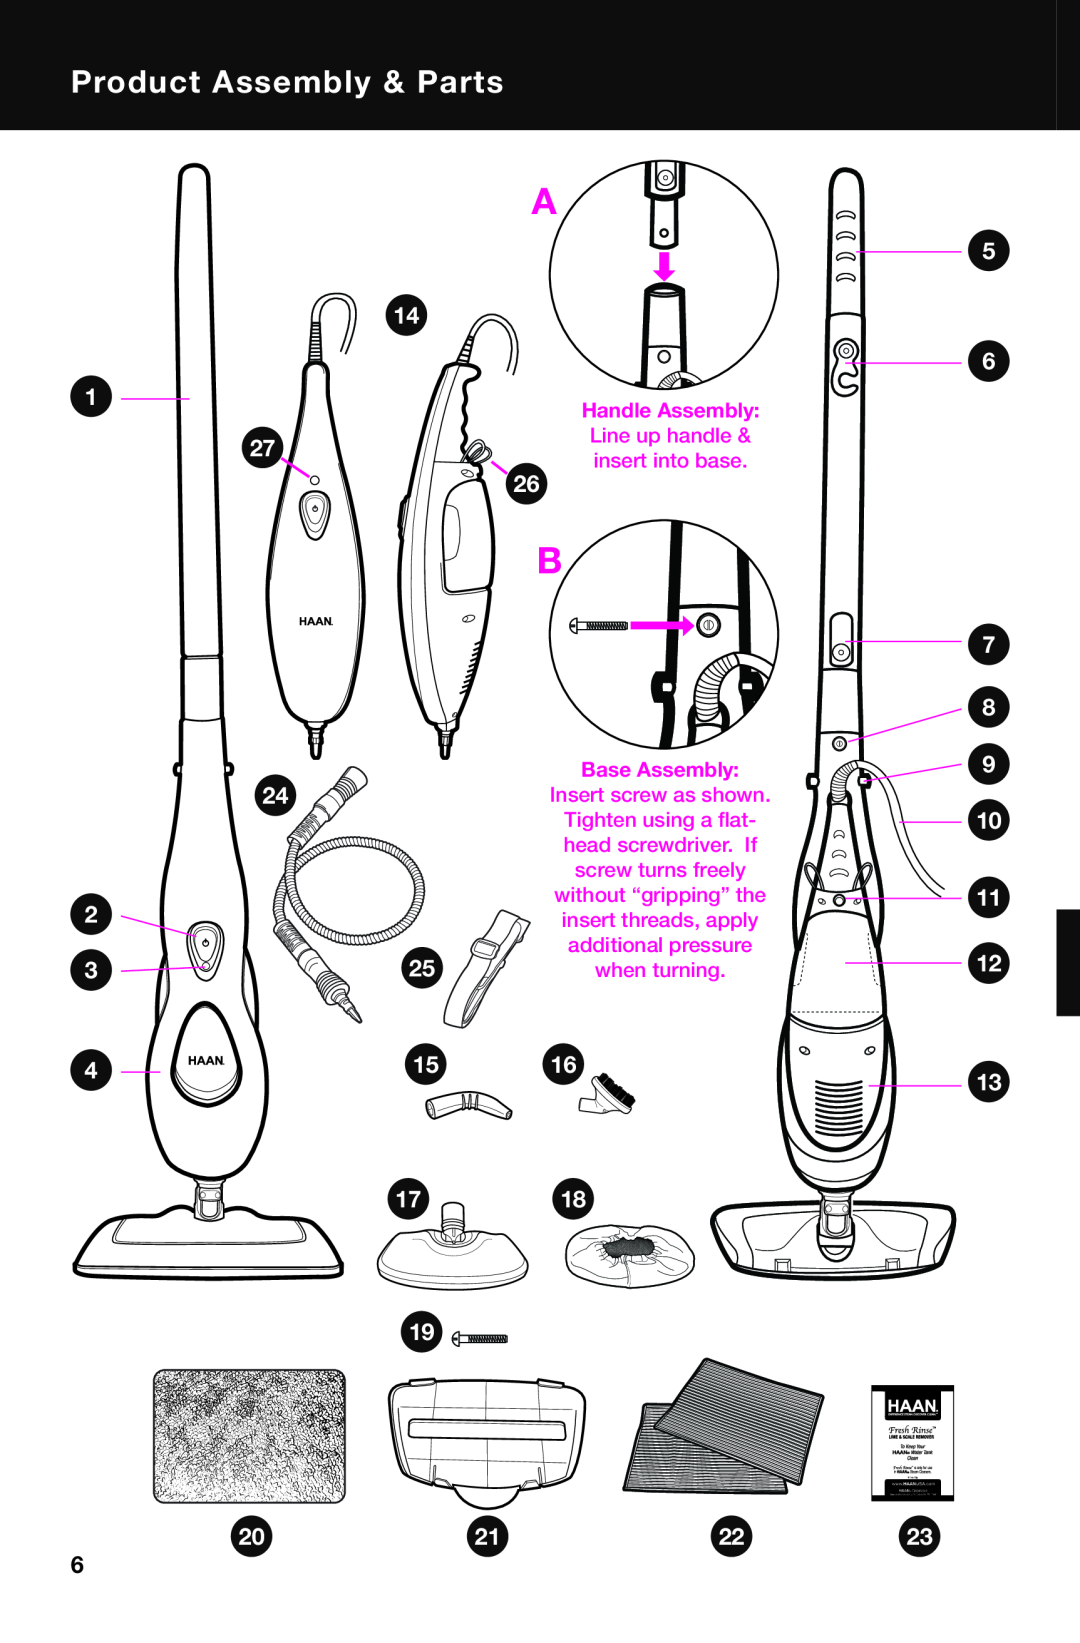 Haan SI-75 Product Assembly & Parts, 1718, Line up handle, insert into base, Tighten using a flat, head screwdriver. If 